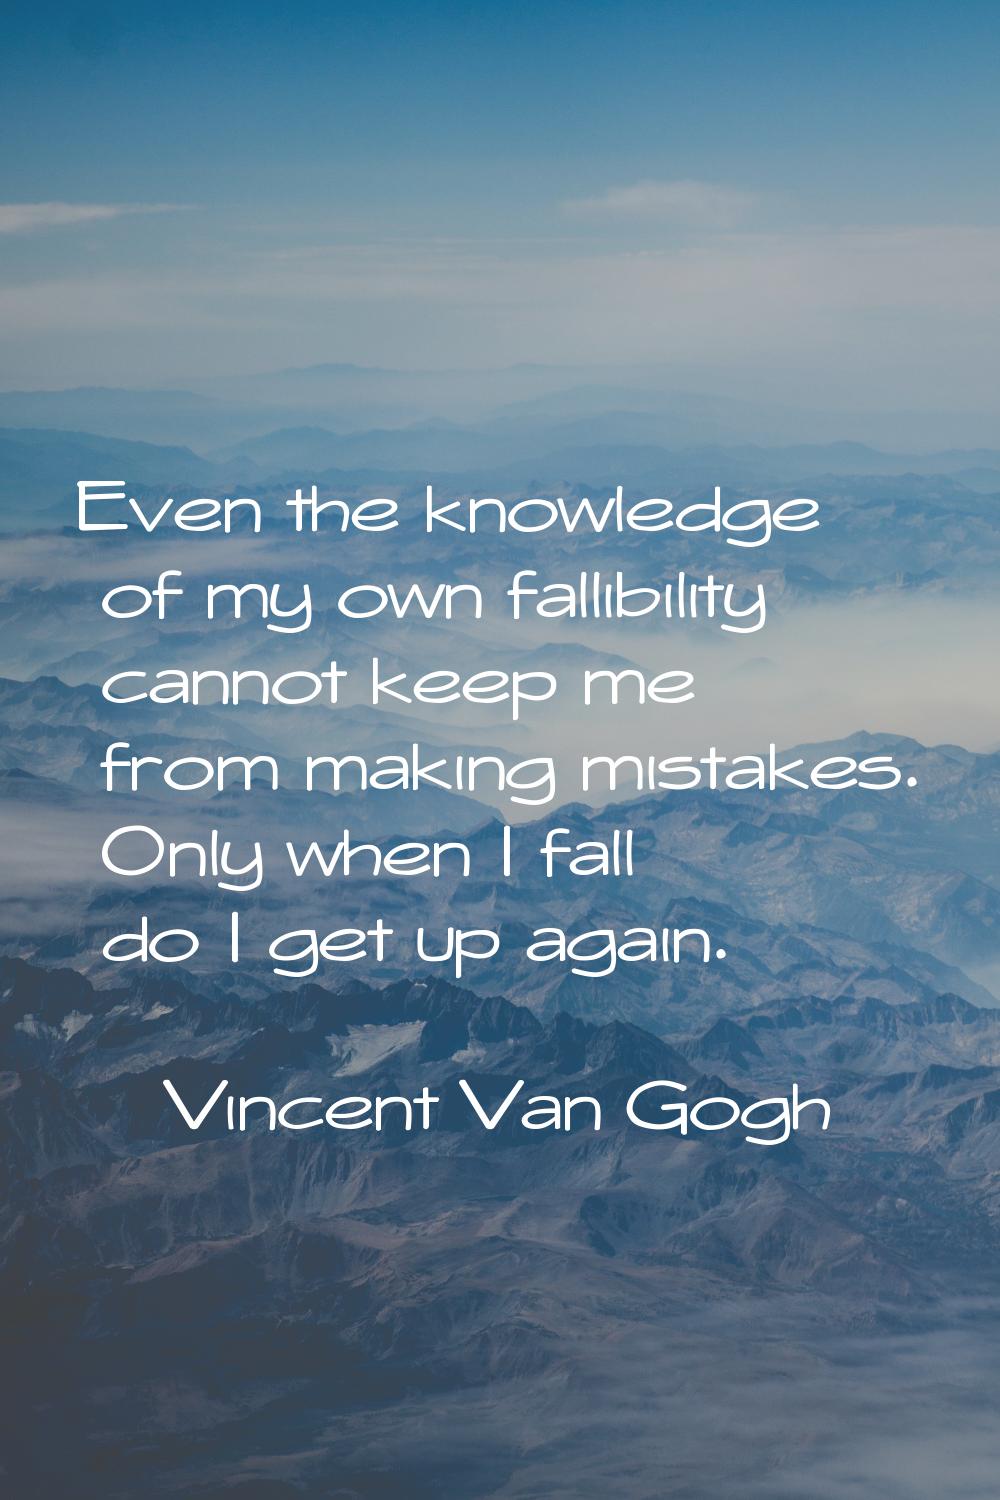 Even the knowledge of my own fallibility cannot keep me from making mistakes. Only when I fall do I